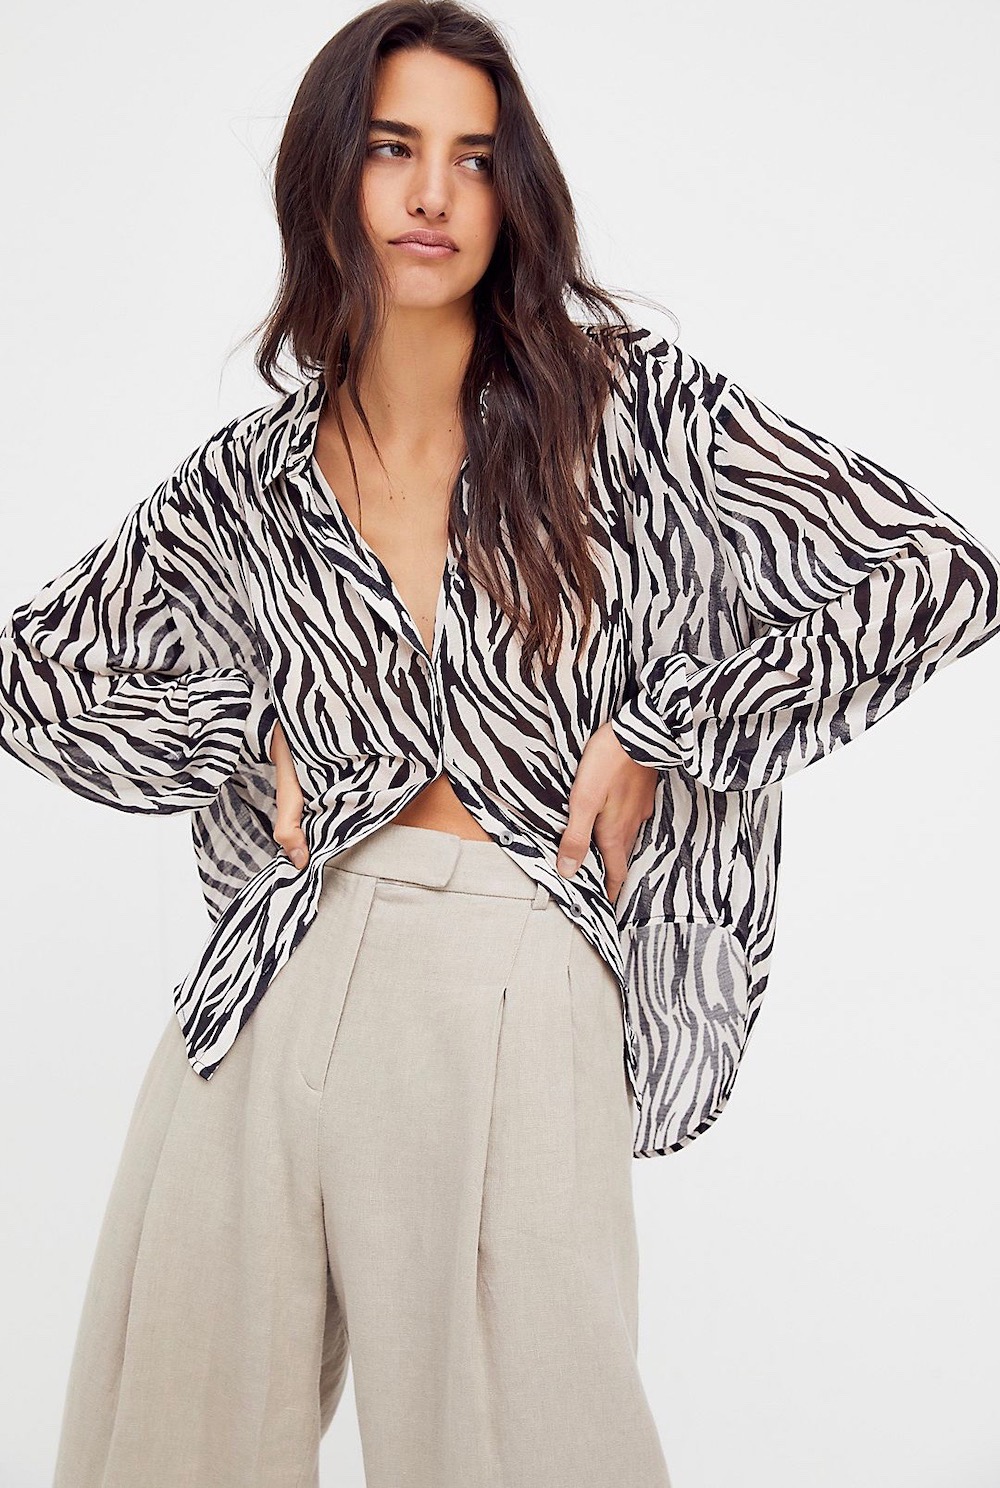 Summer Animal Prints to Wear Everywhere - theFashionSpot